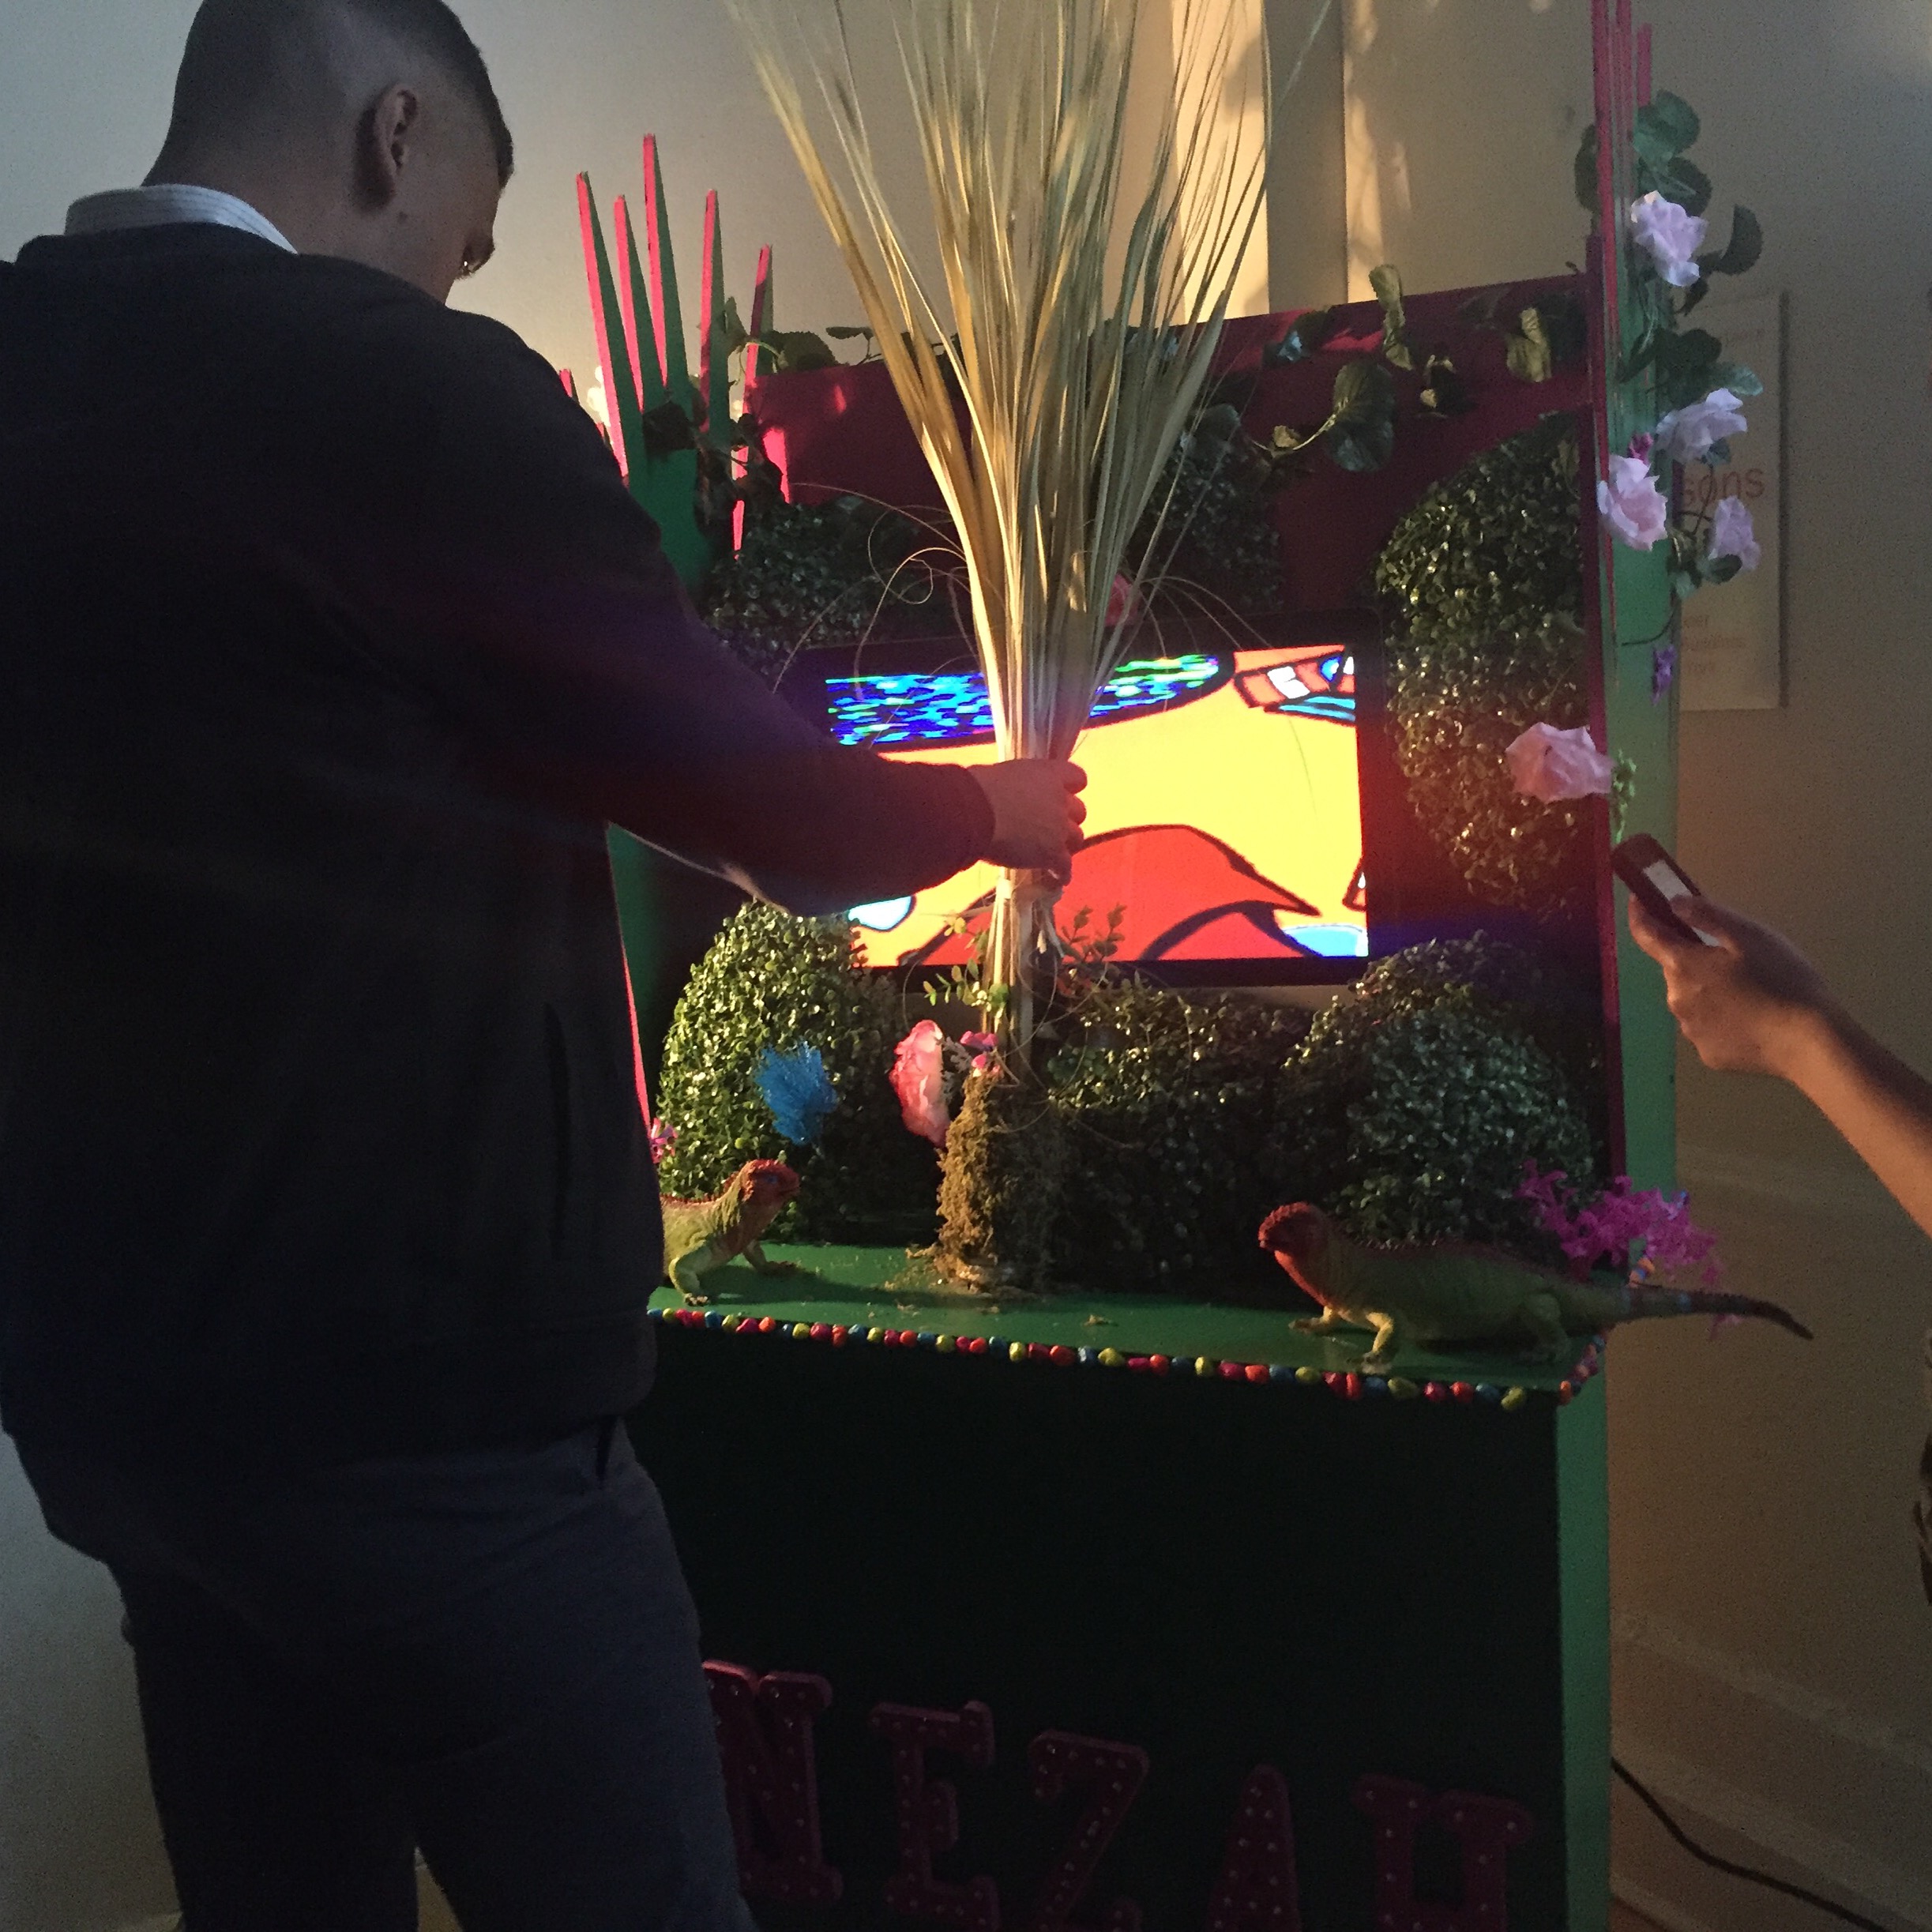 Using unity3d and a custom built flora and fauna arcade cabinet to tell the story of Za's adventure in the Jungle, where the main character is trying to dodge monsters and jungle pitfalls while collecting parts of her space ship so she can go back to her home.